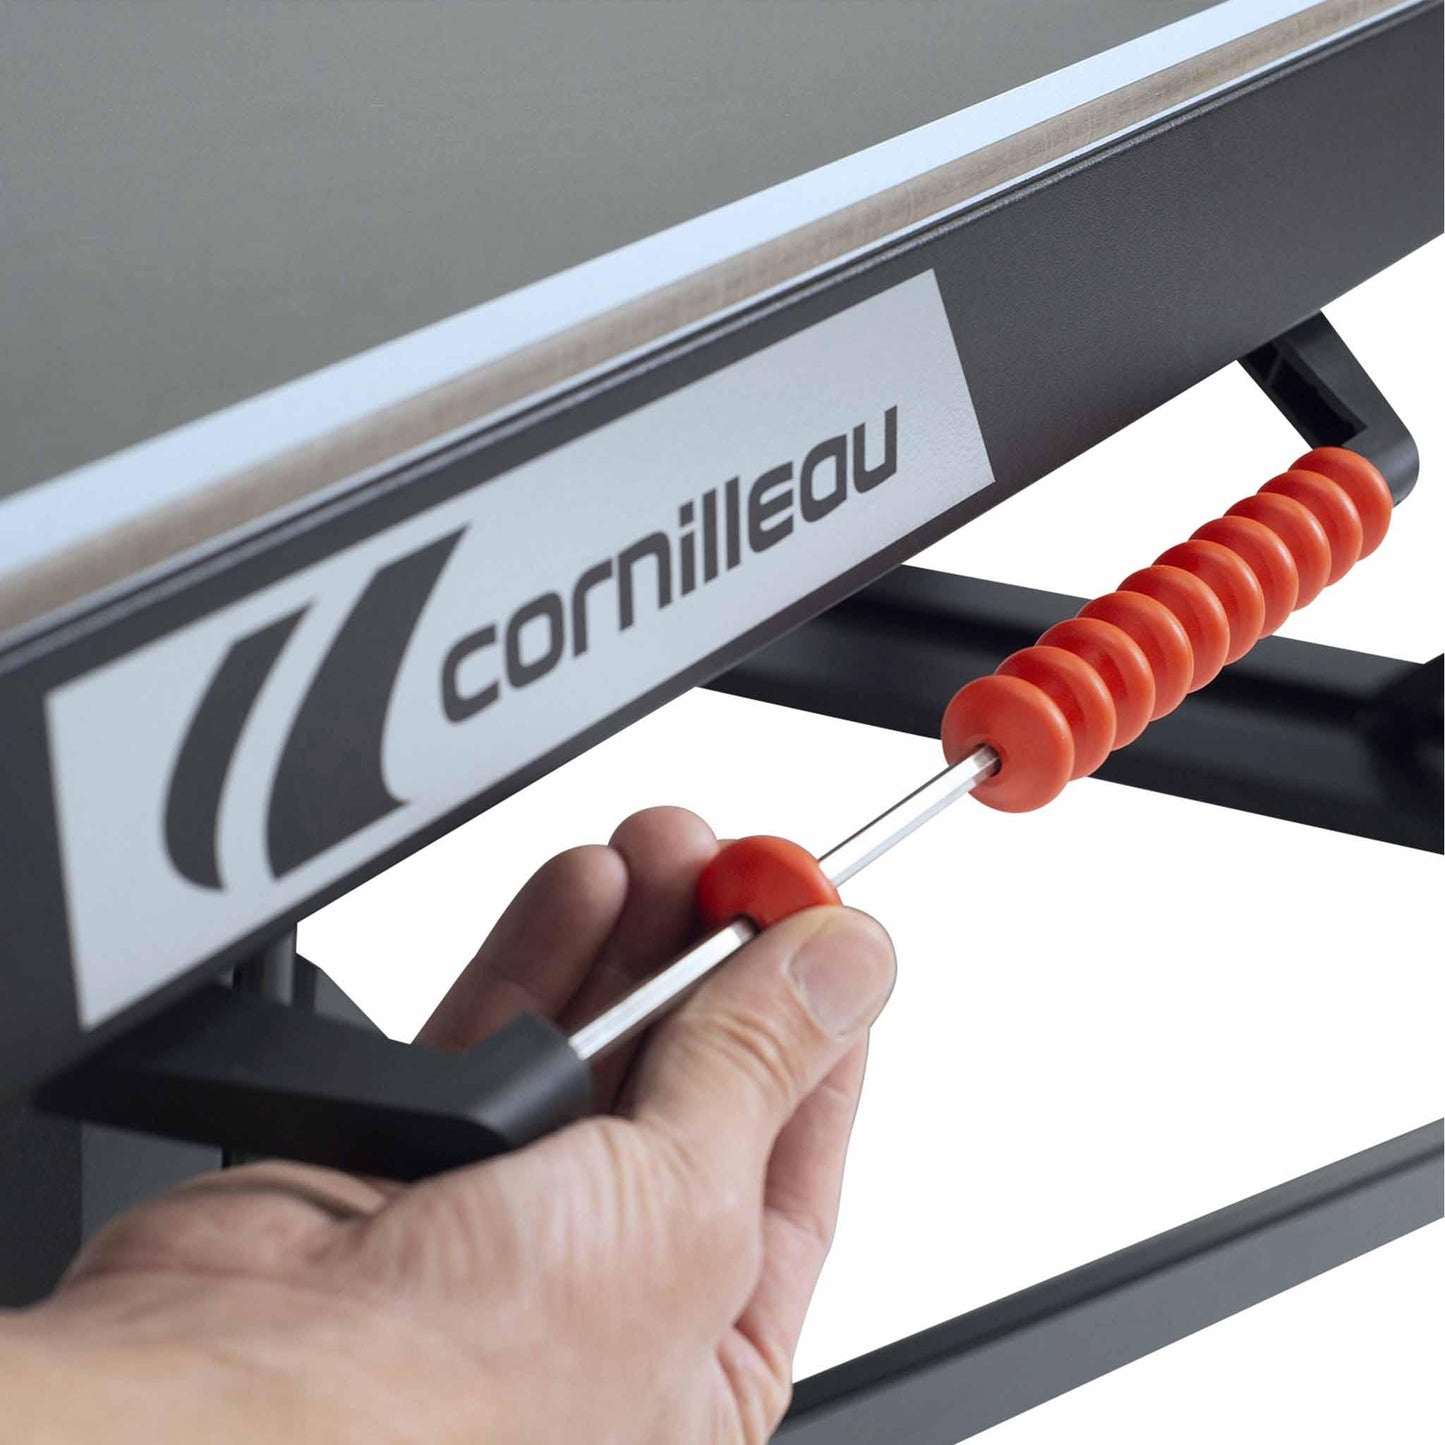 Cornilleau 700X Indoor / Outdoor Table Tennis Table - Centric Billiard | Hong Kong's Leading Game Room Superstore